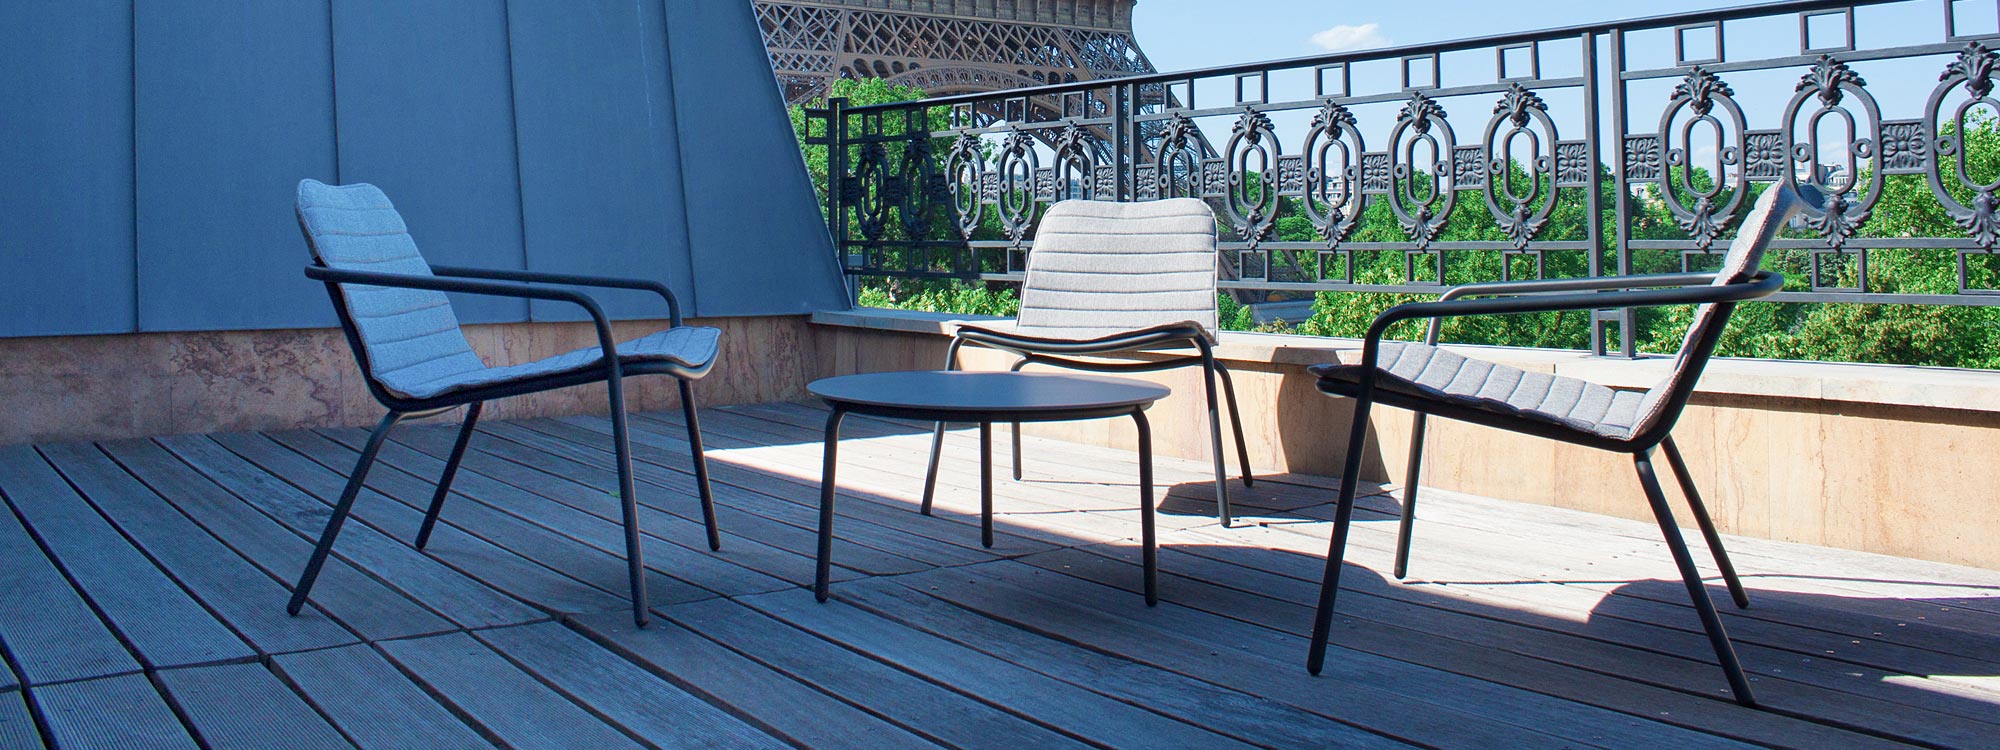 Fantastic shot of Starling outdoor lounge chairs on Parisian roof top terrace with Eiffel Tower in background